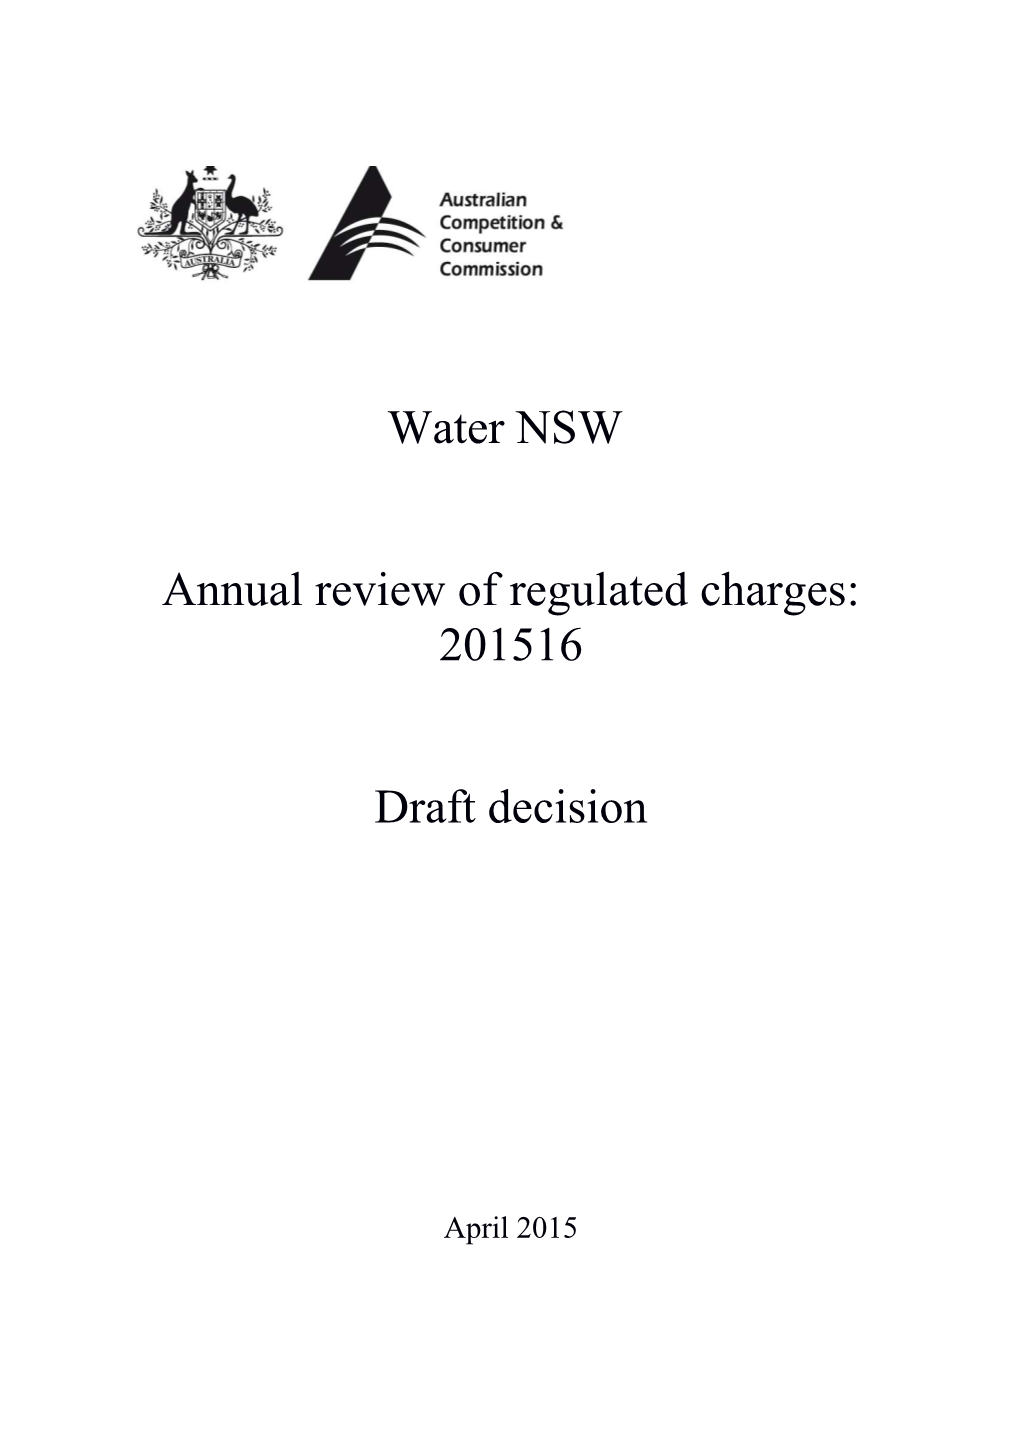 Annual Review of Regulated Charges: 201516